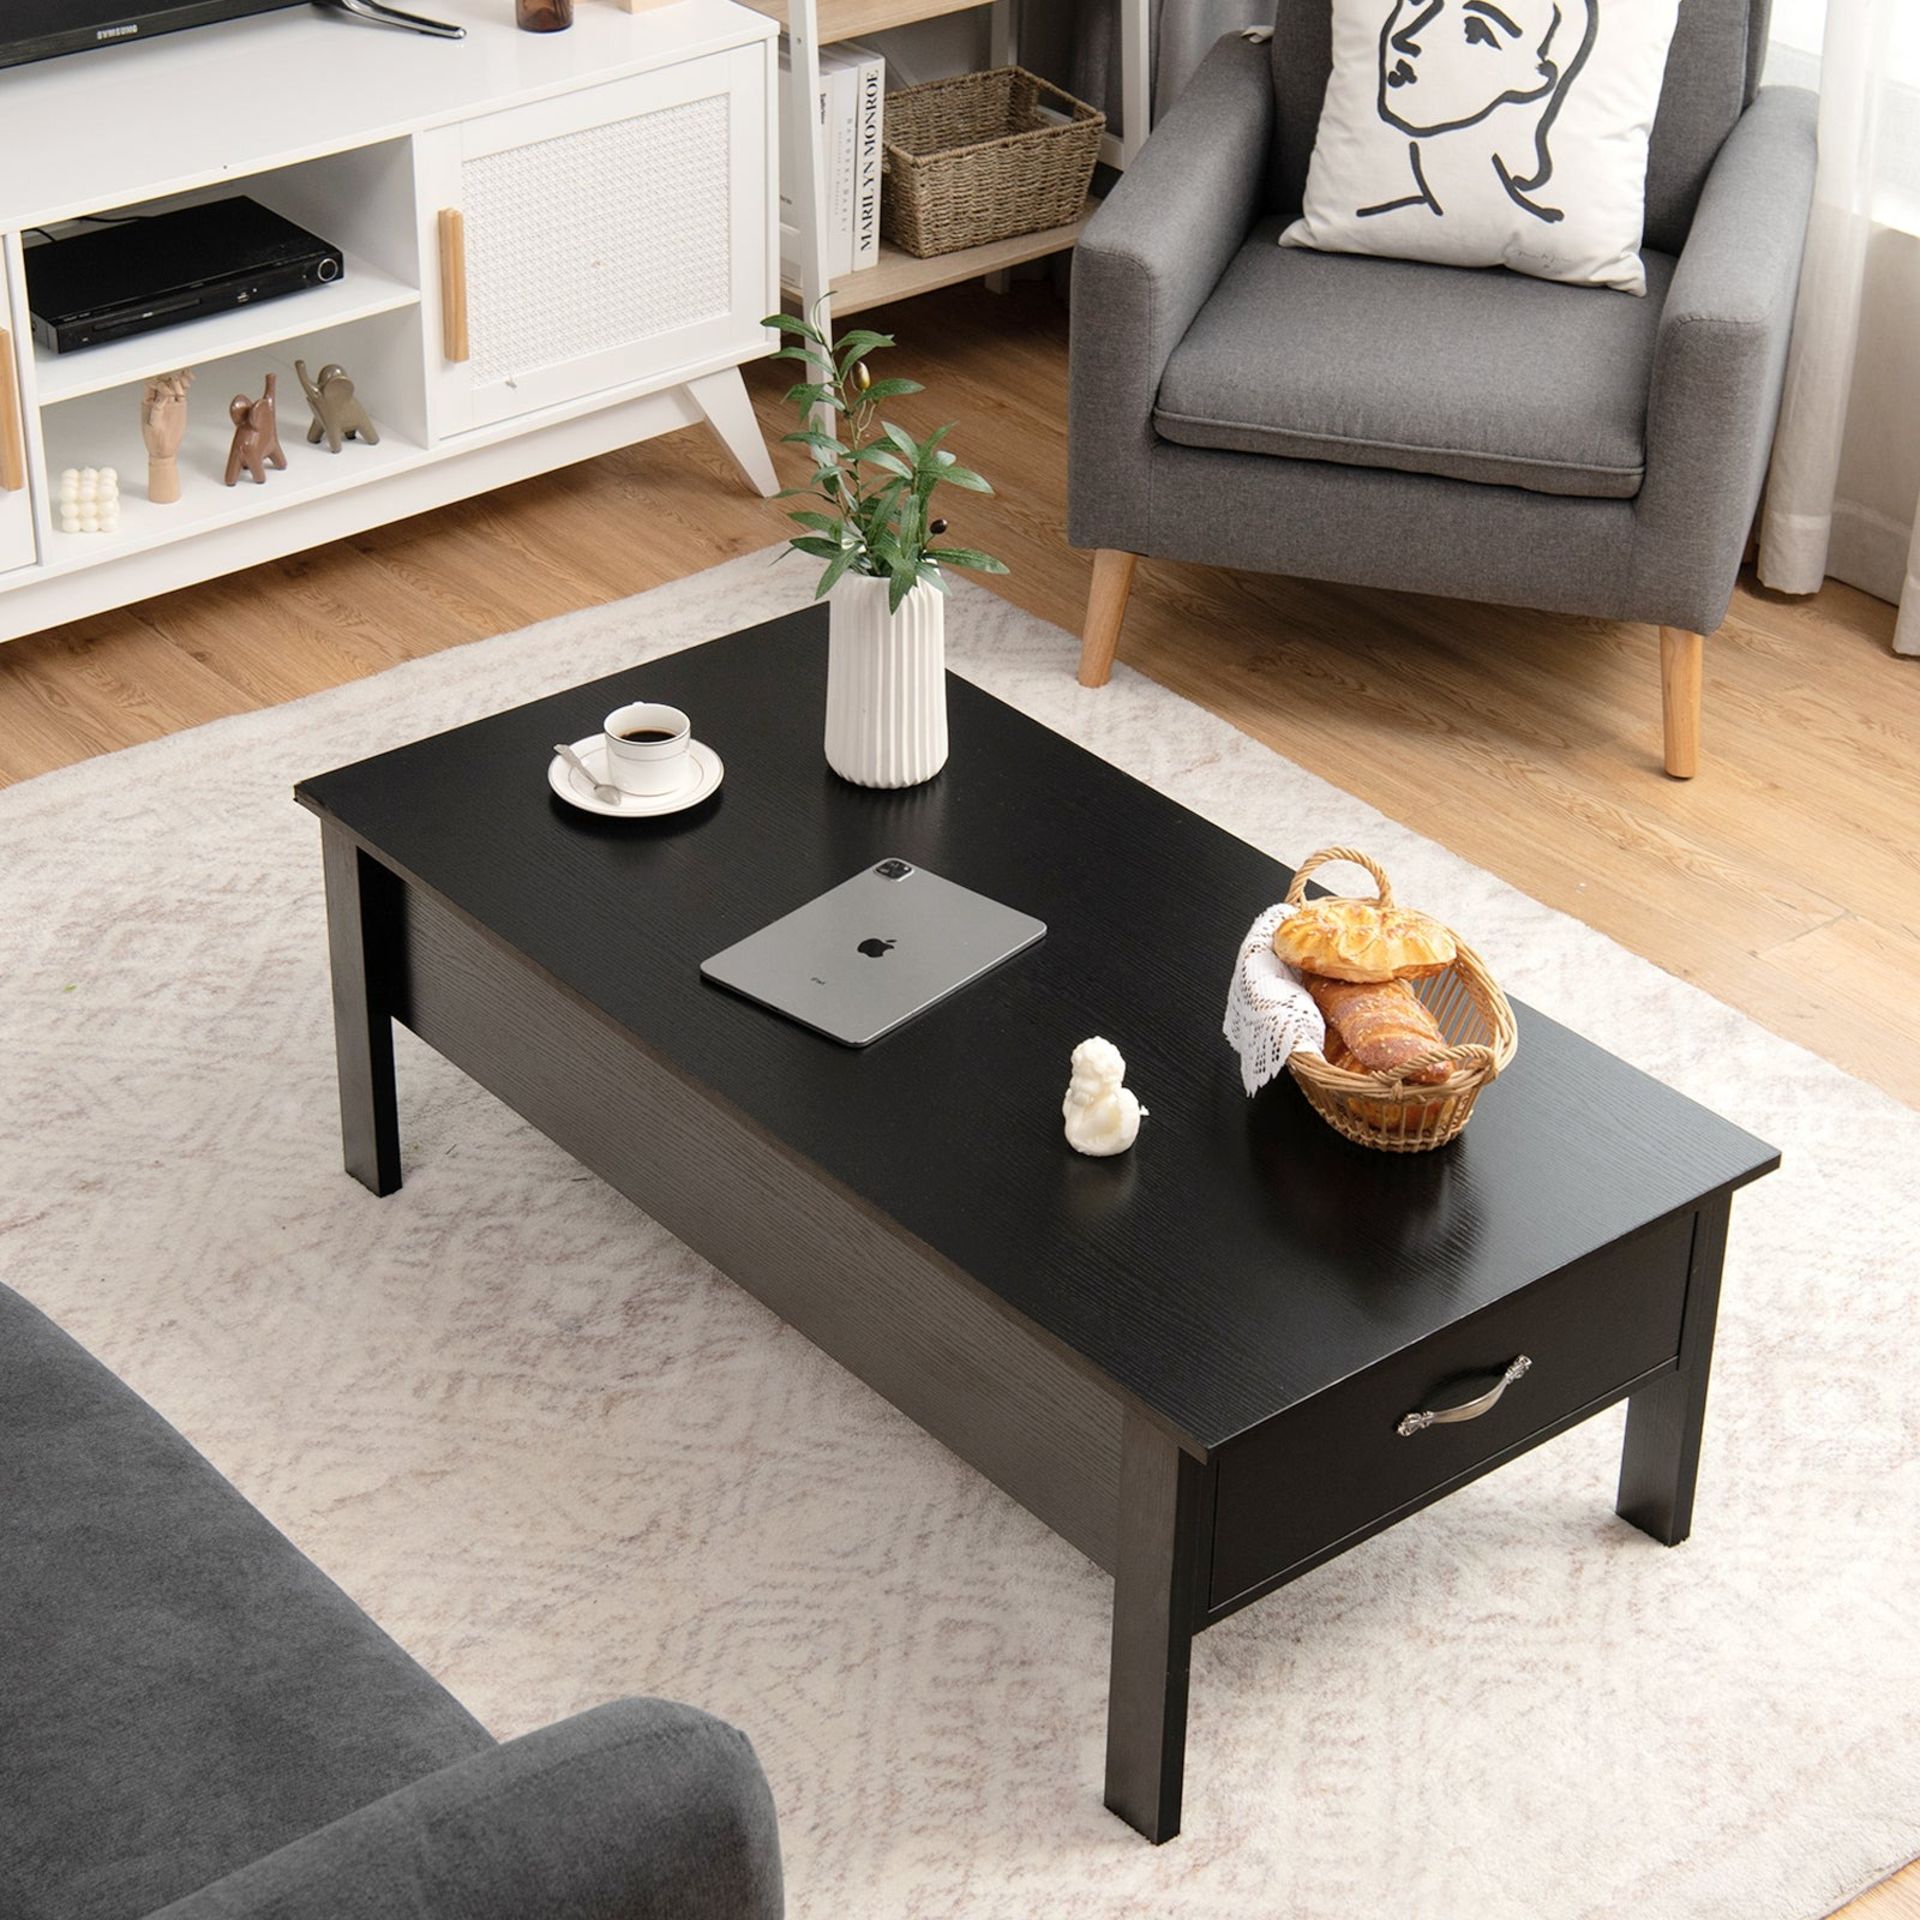 Lift Up Top Coffee Table with Hidden Storage Compartment-Black - ER53